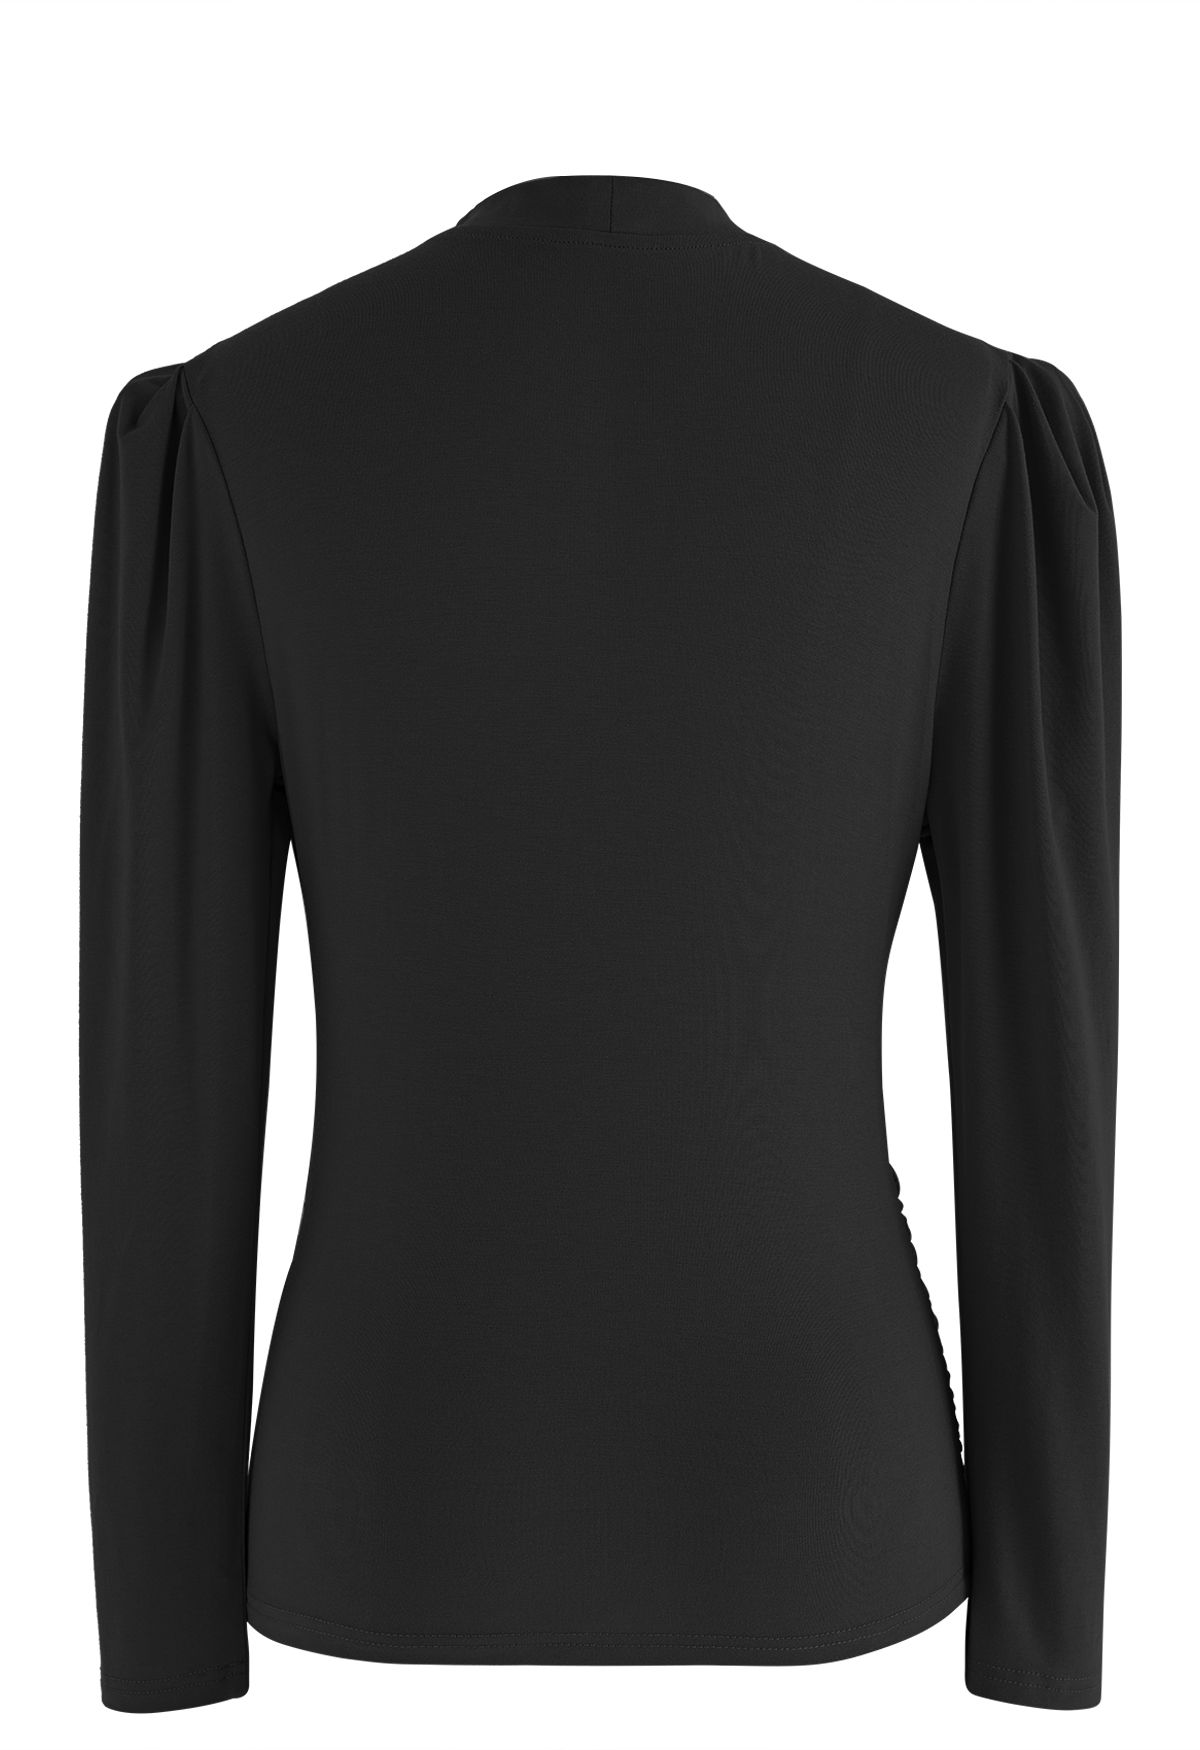 Choker Neck Ruched Front Long Sleeve Top in Black